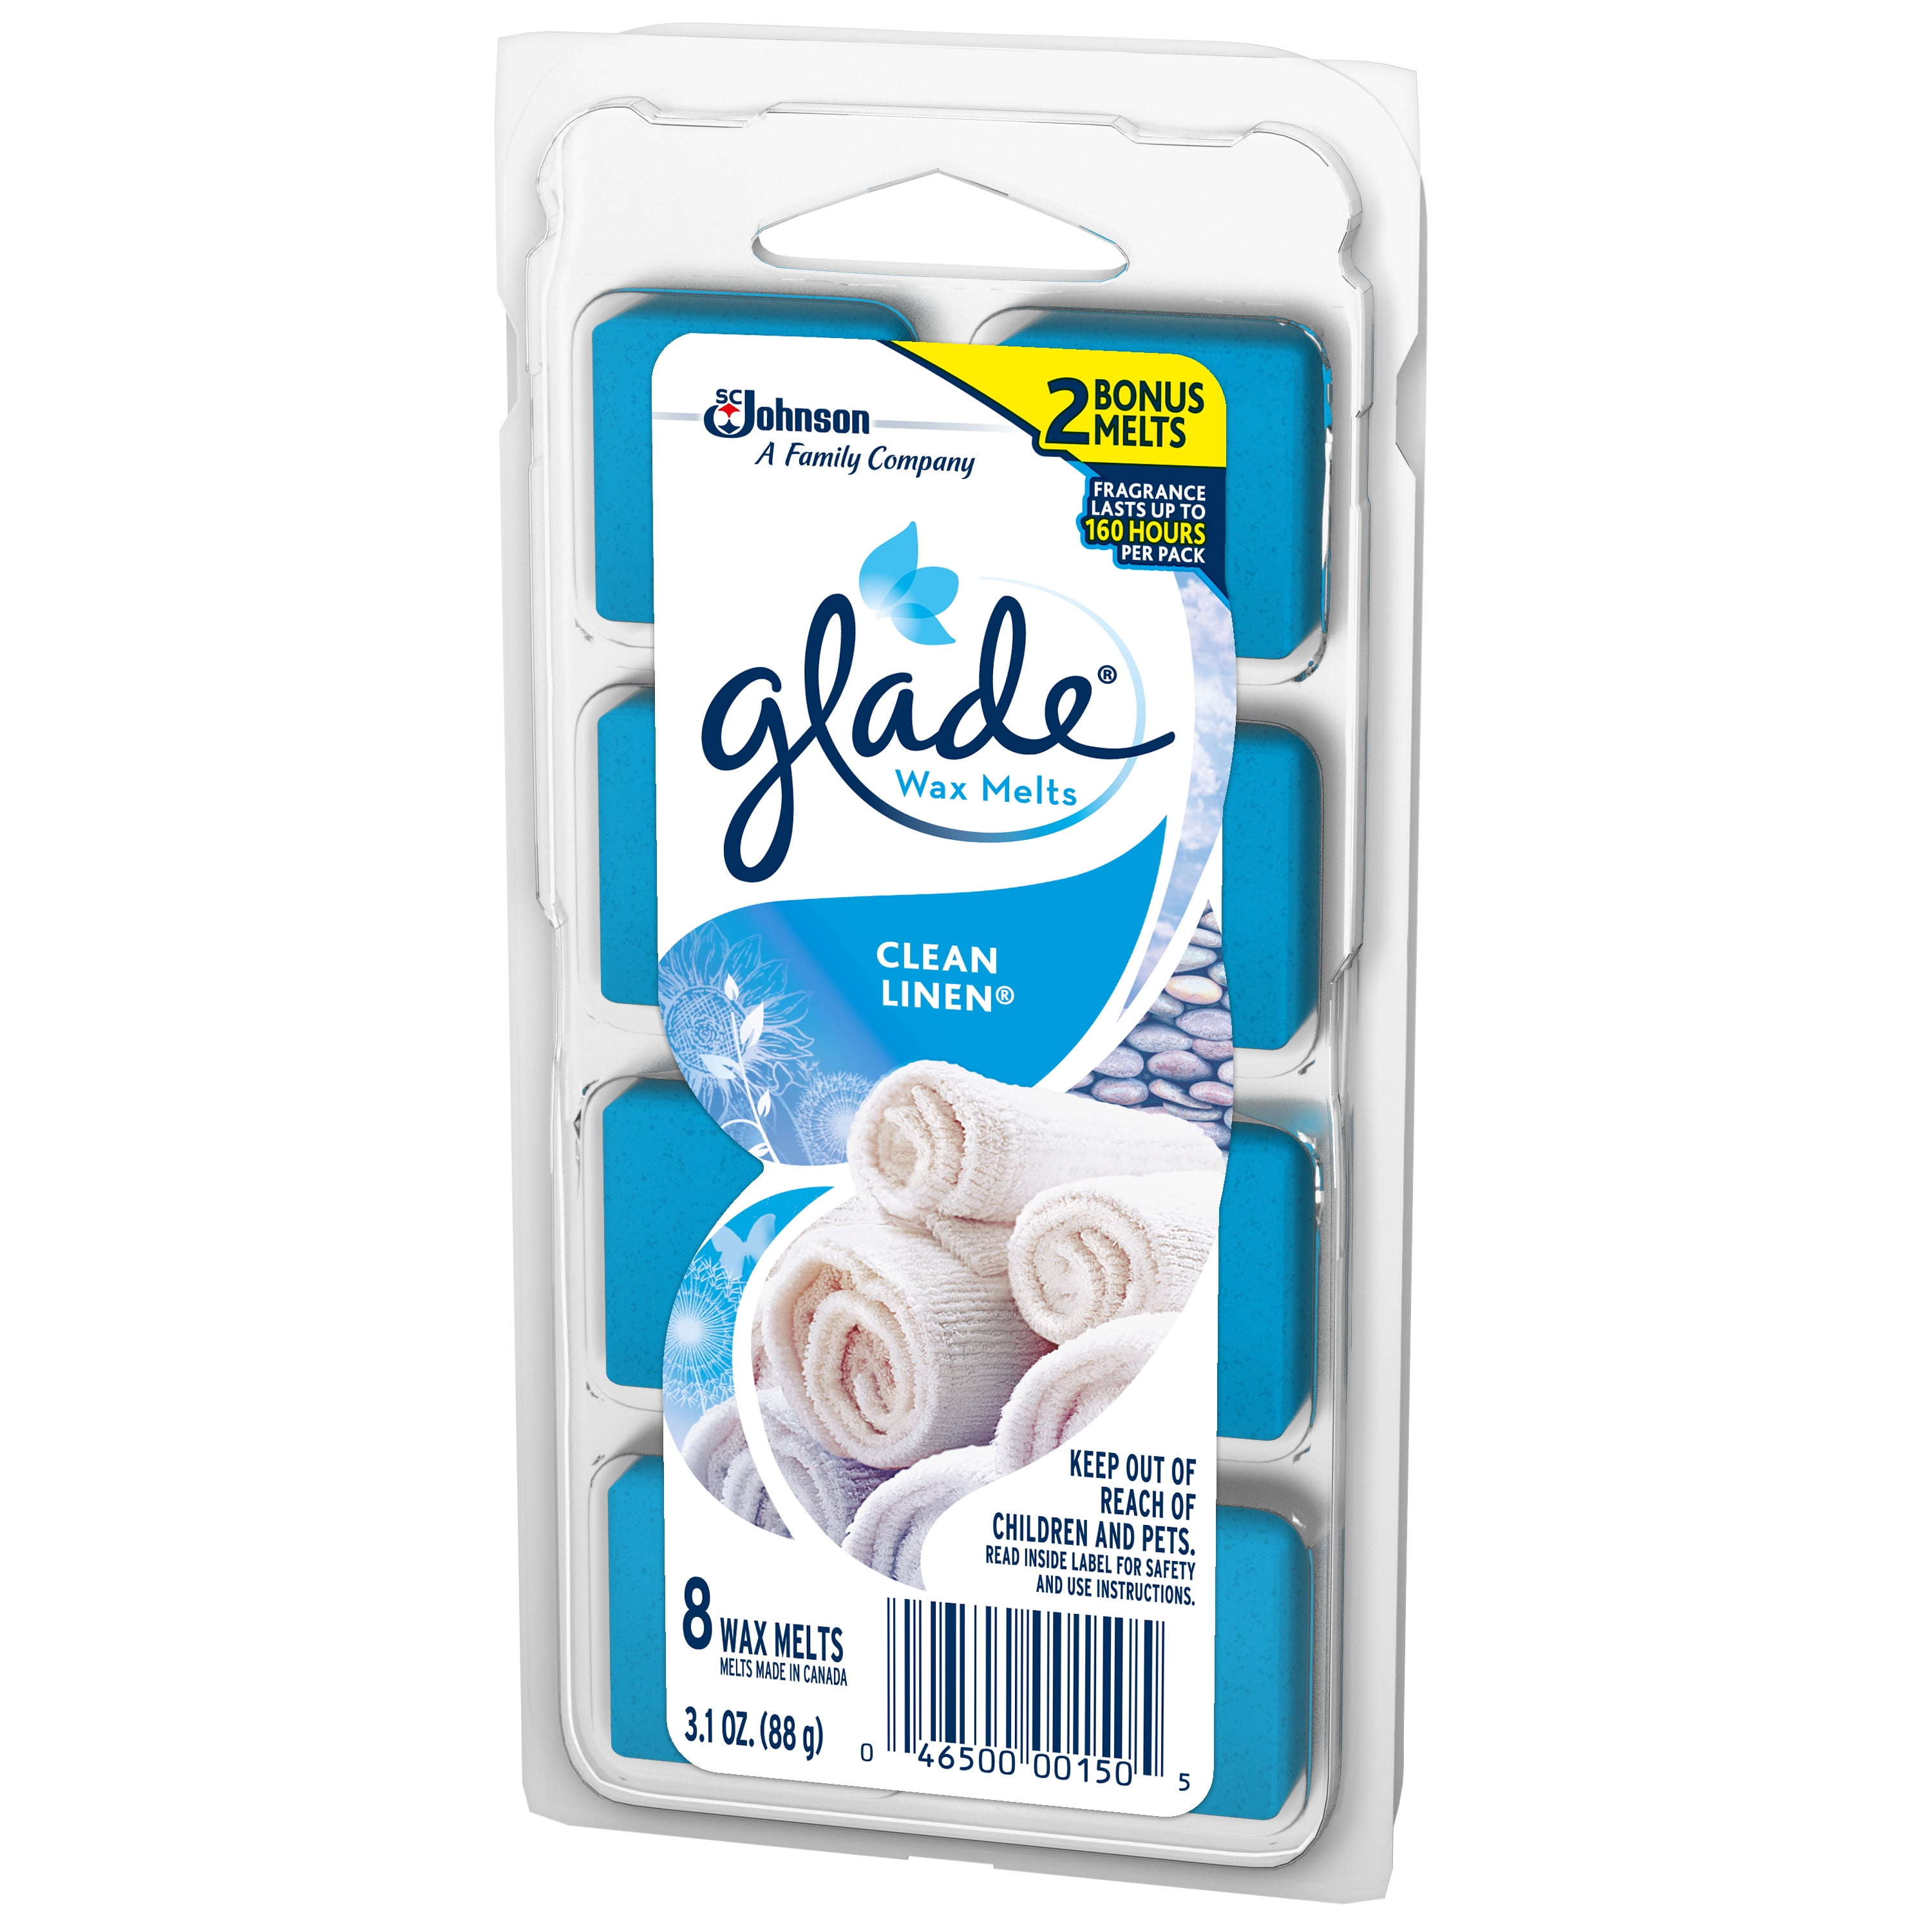 4 X GLADE CLEAN LINEN WAX MELTS CANDLE BURNER REFILL FRAGRANCE 66G 